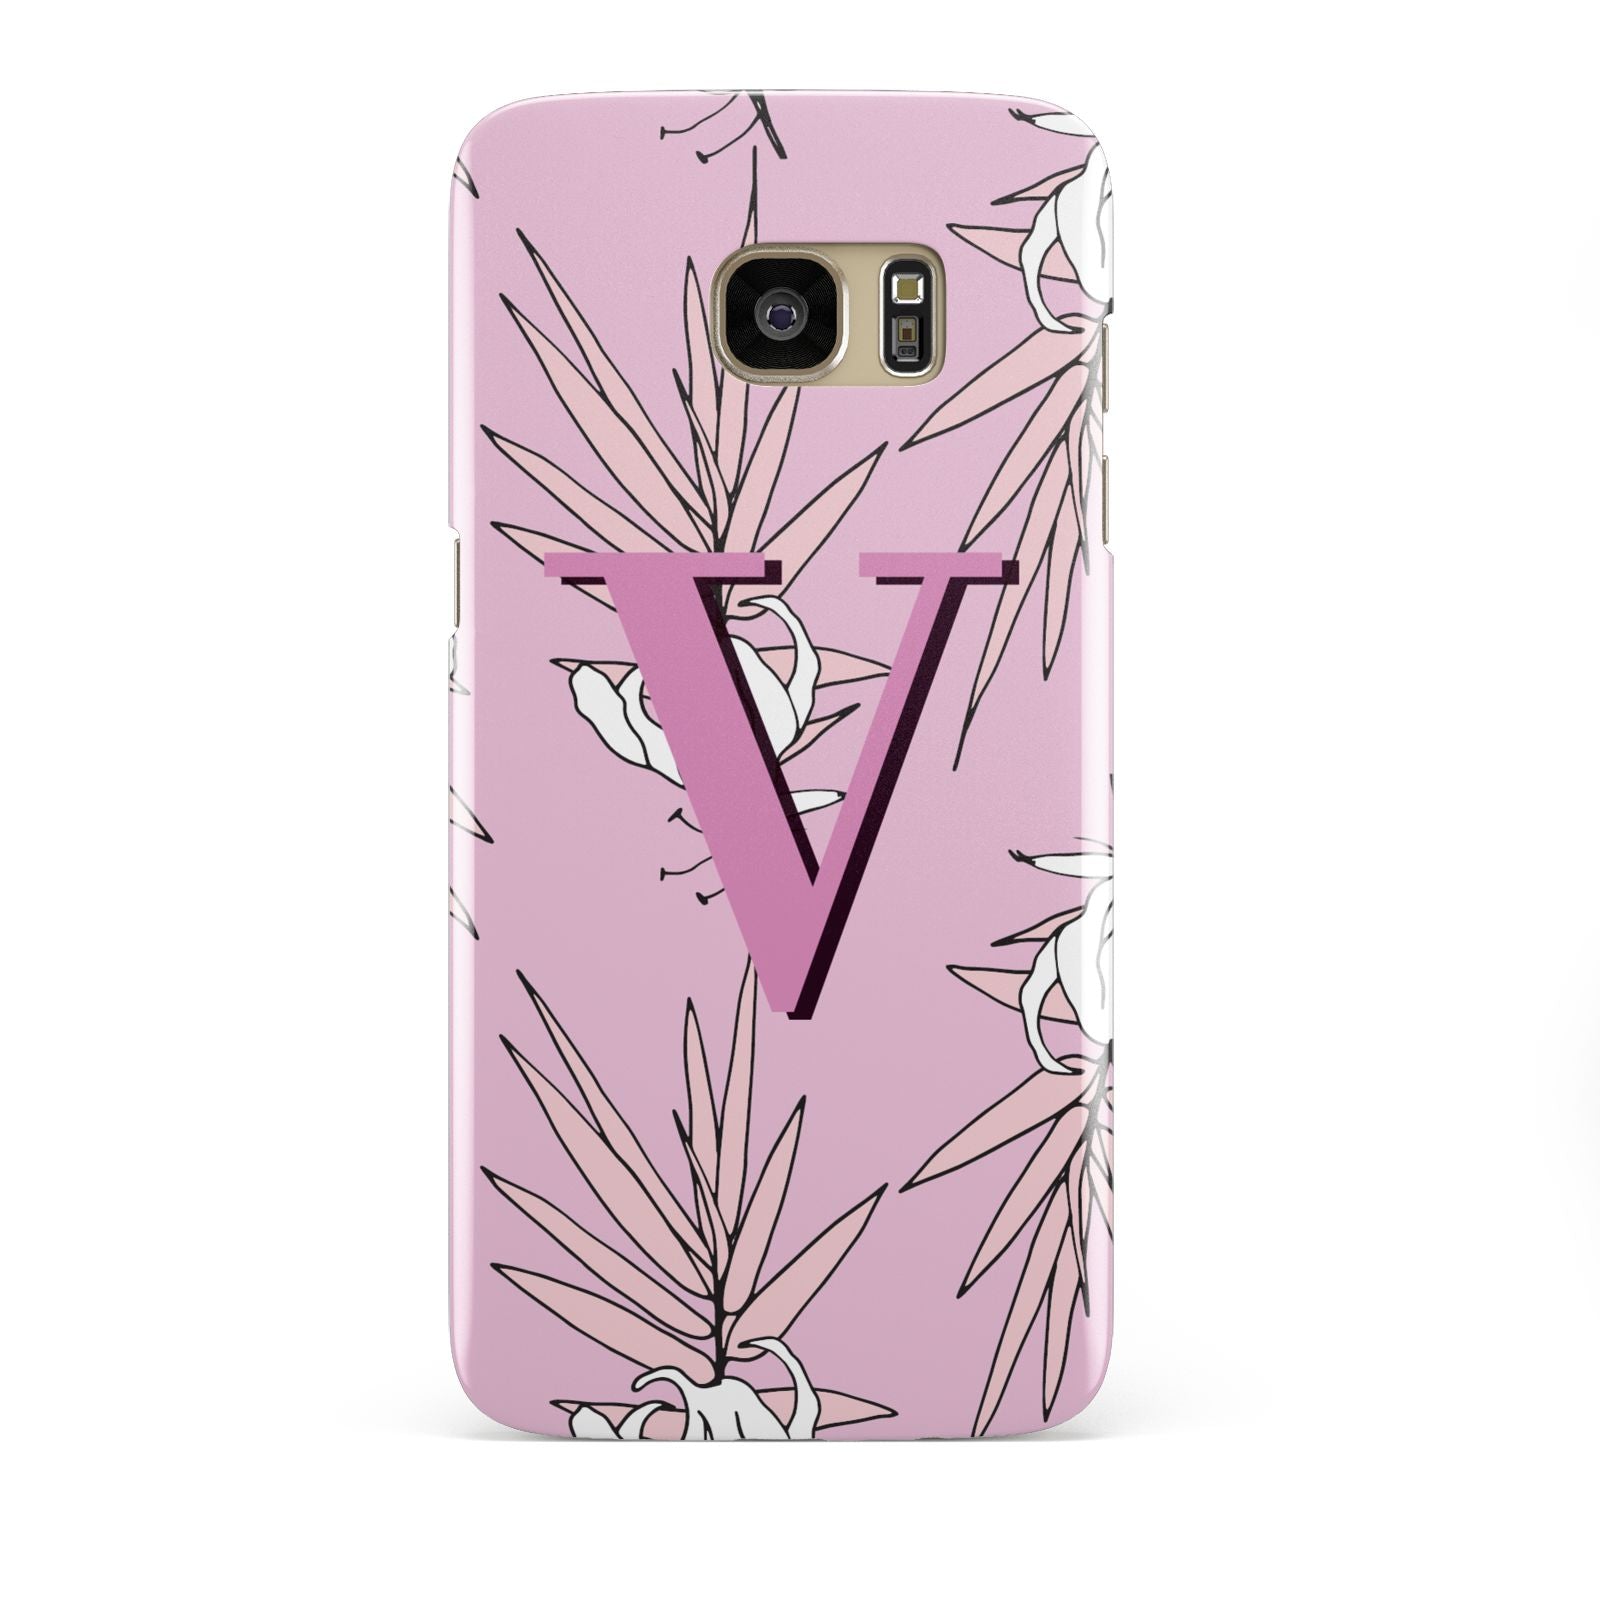 Personalised Pink and White Floral Monogram Samsung Galaxy S7 Edge Case